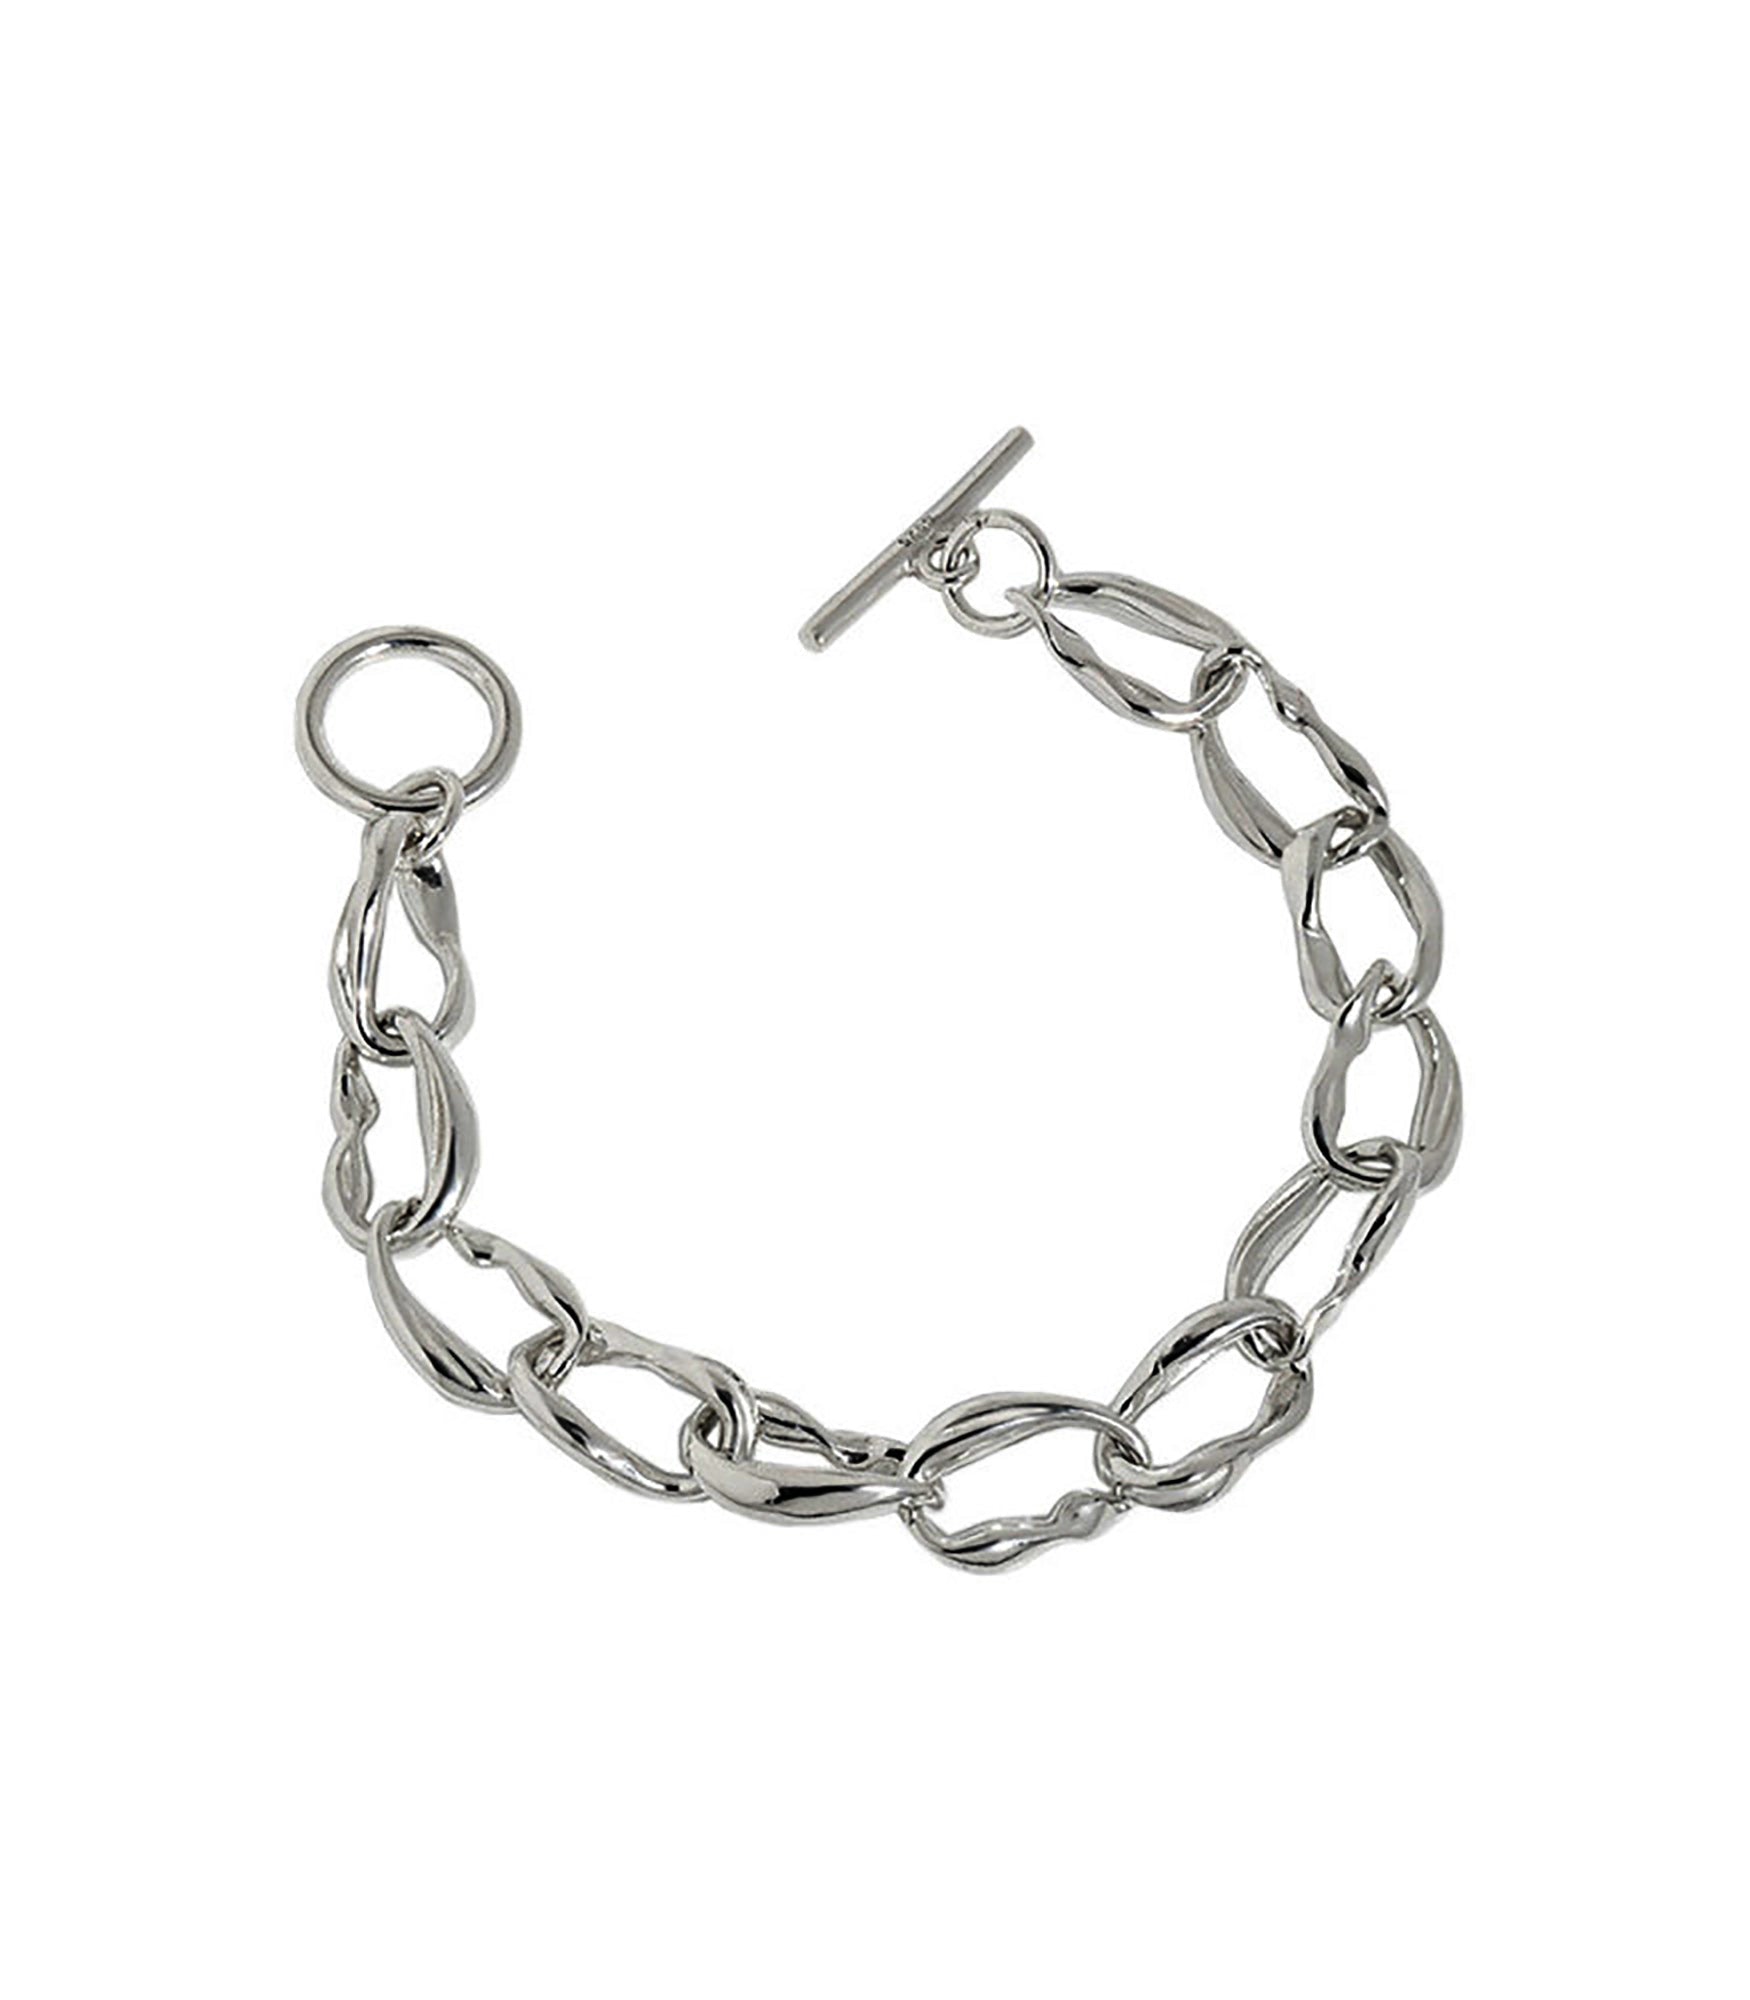 A sterling silver bracelet with a toggle clasp fastening. The bracelet is made up of irregular shaped rings linking together